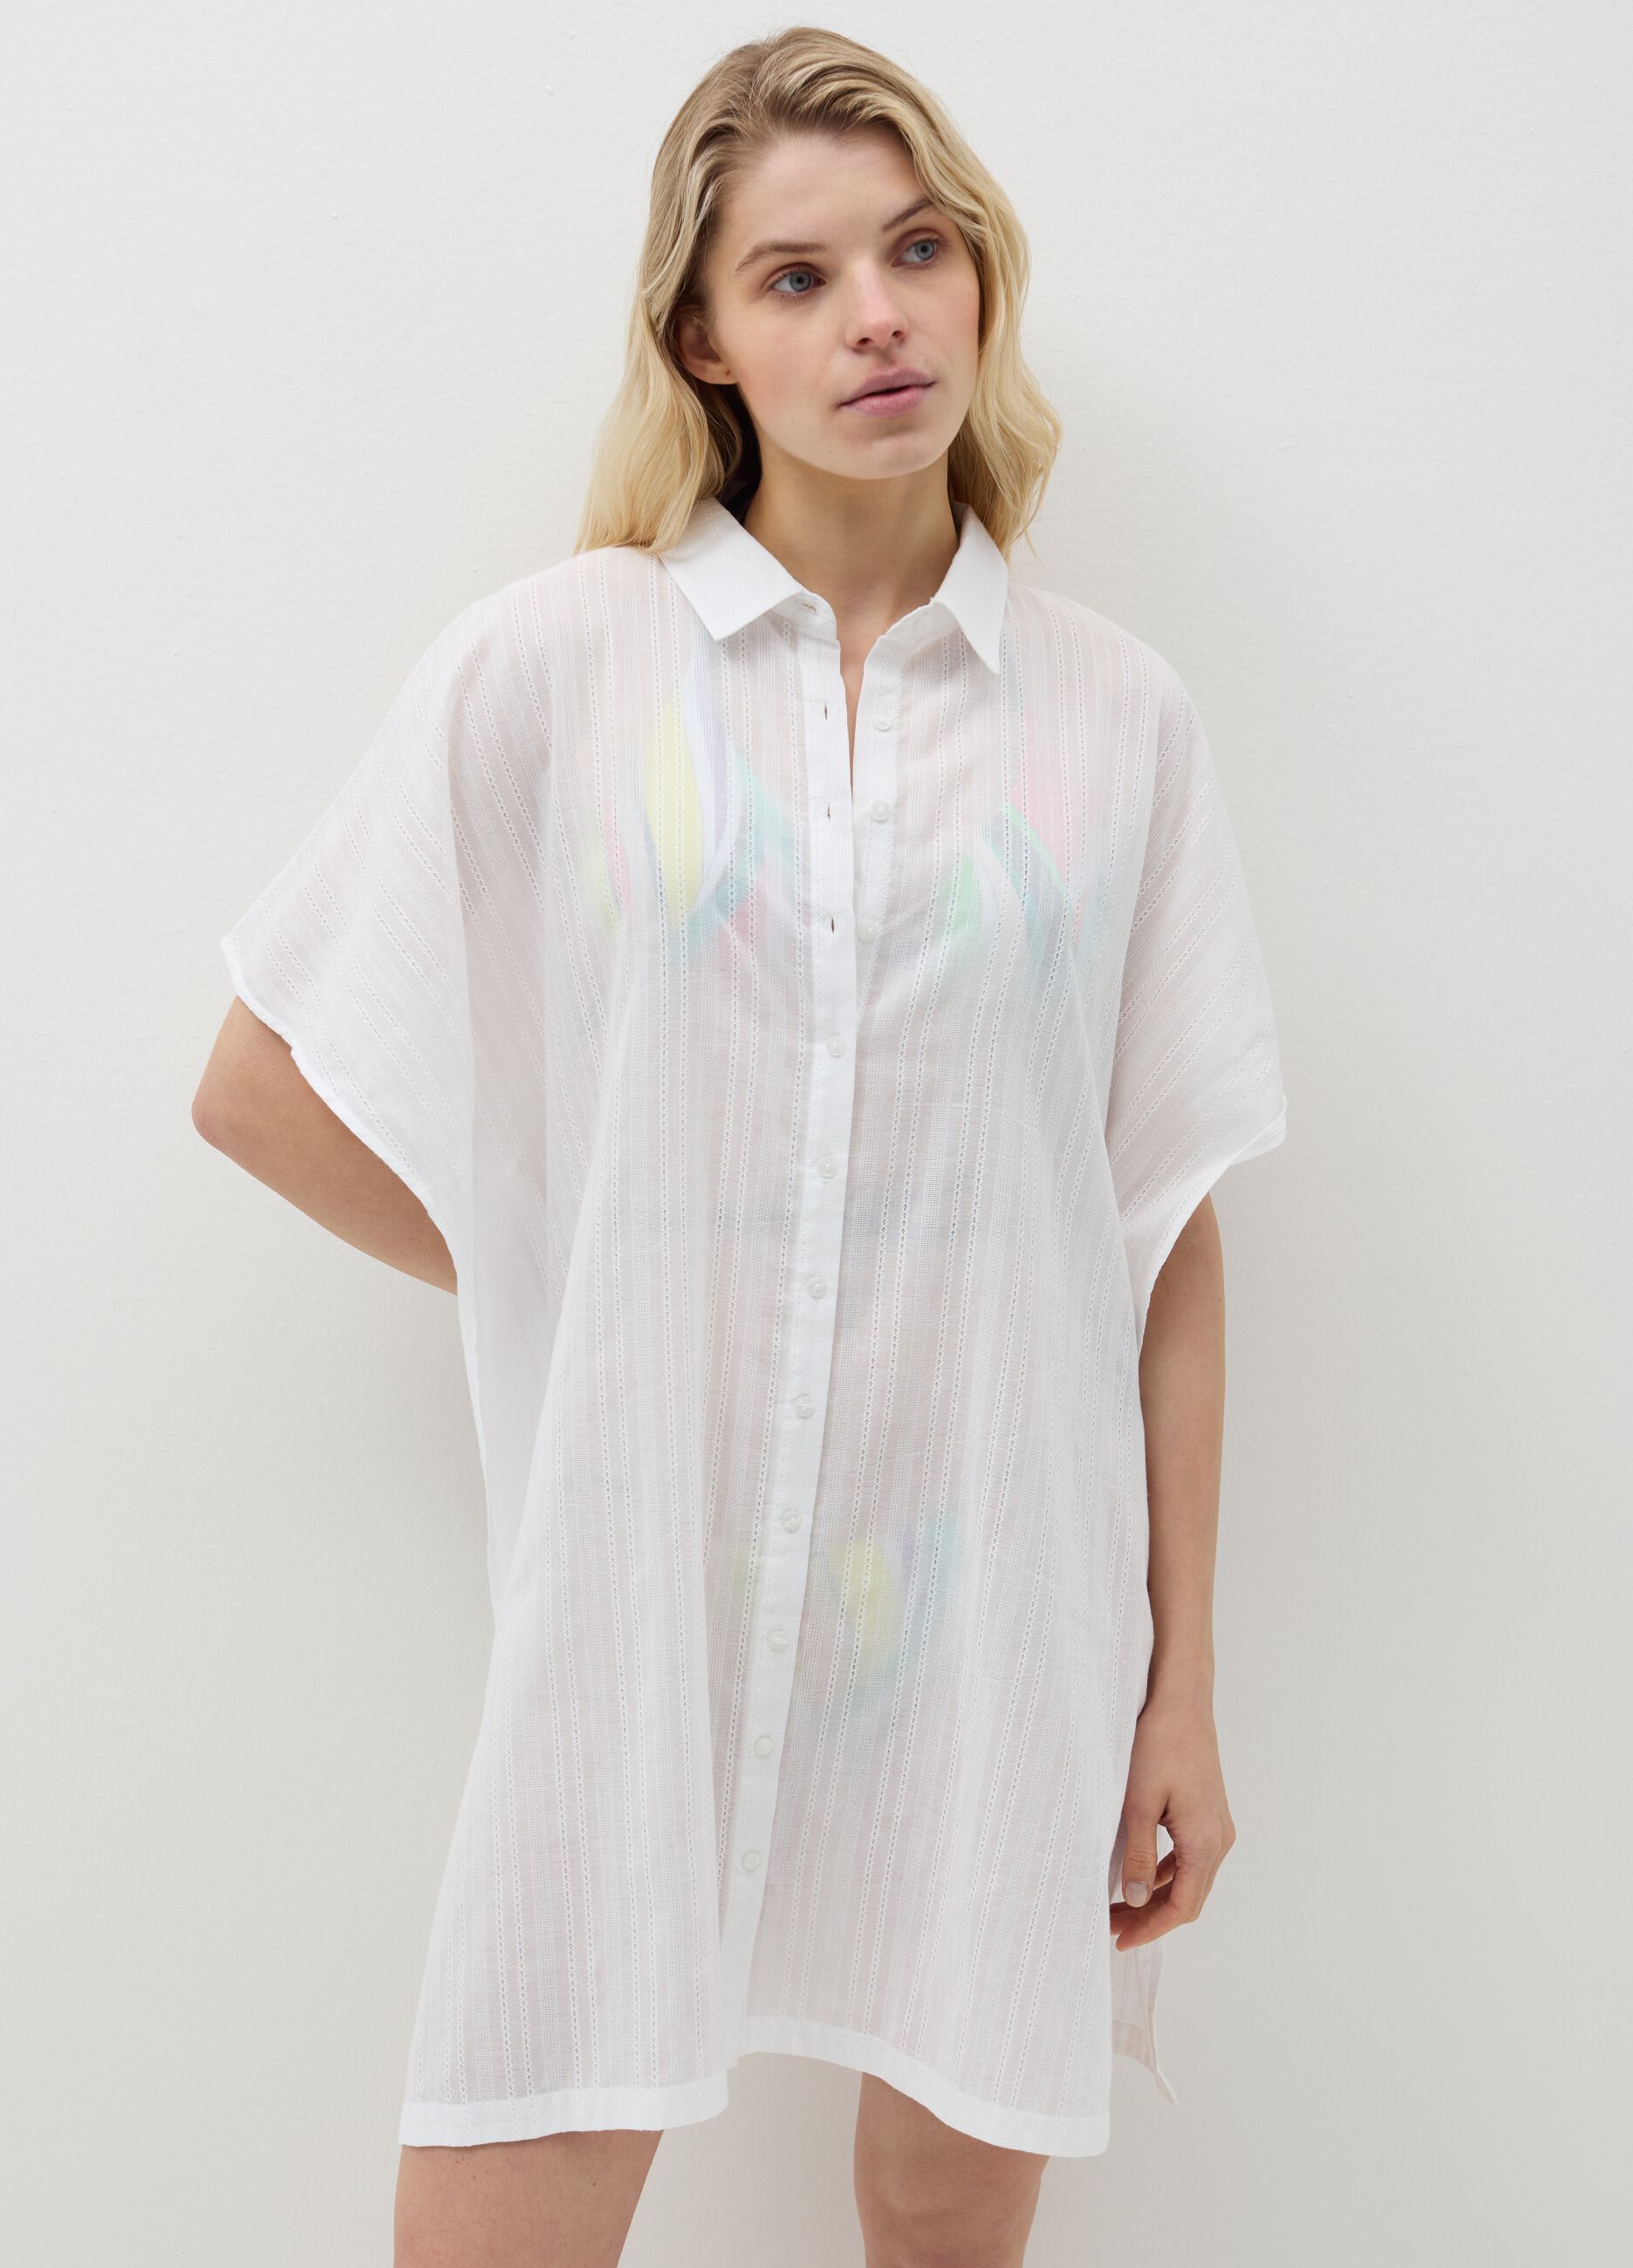 Beach cover-up shirt with striped weave